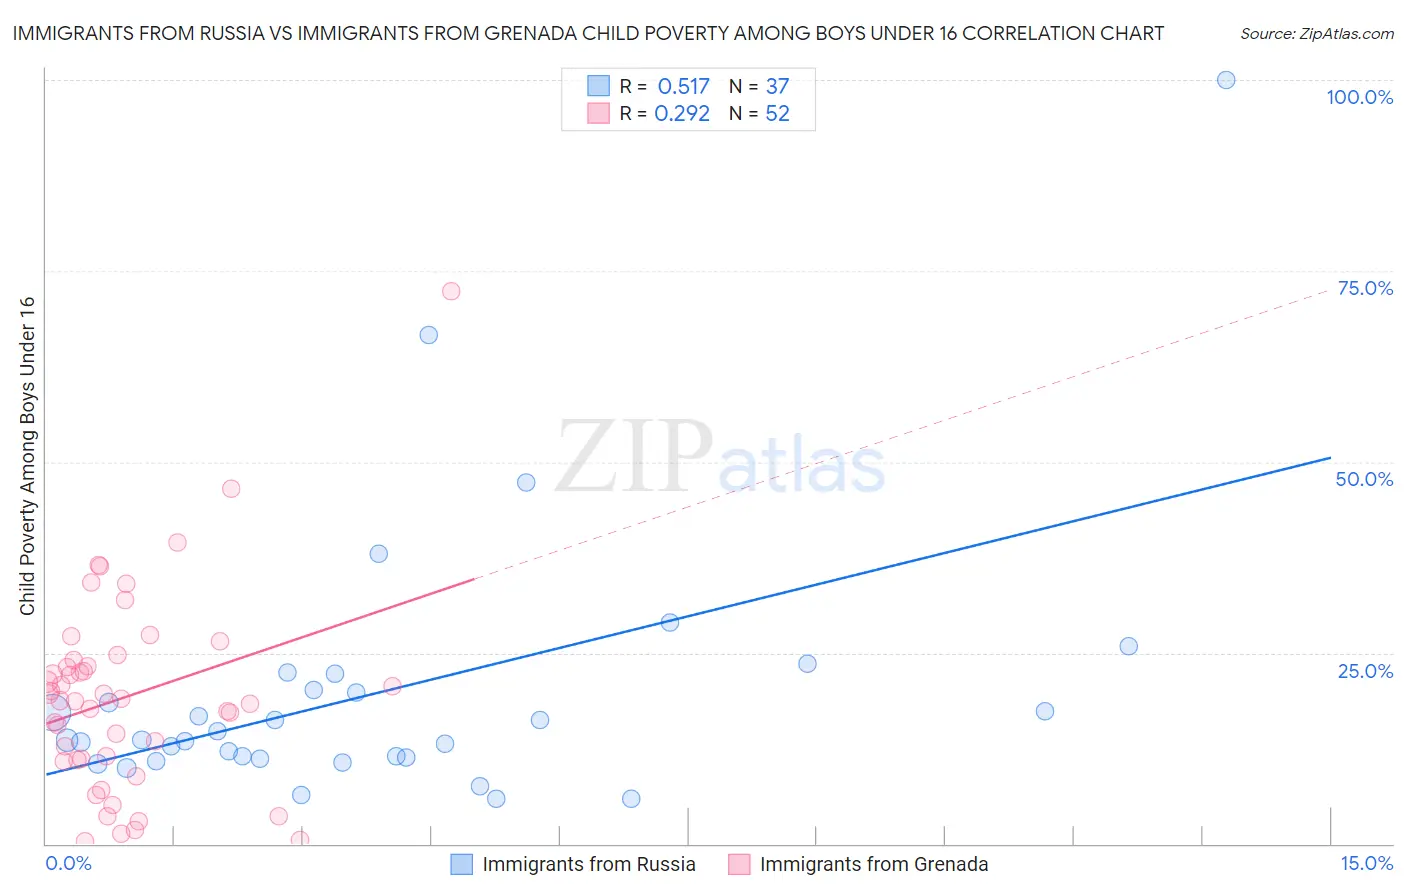 Immigrants from Russia vs Immigrants from Grenada Child Poverty Among Boys Under 16